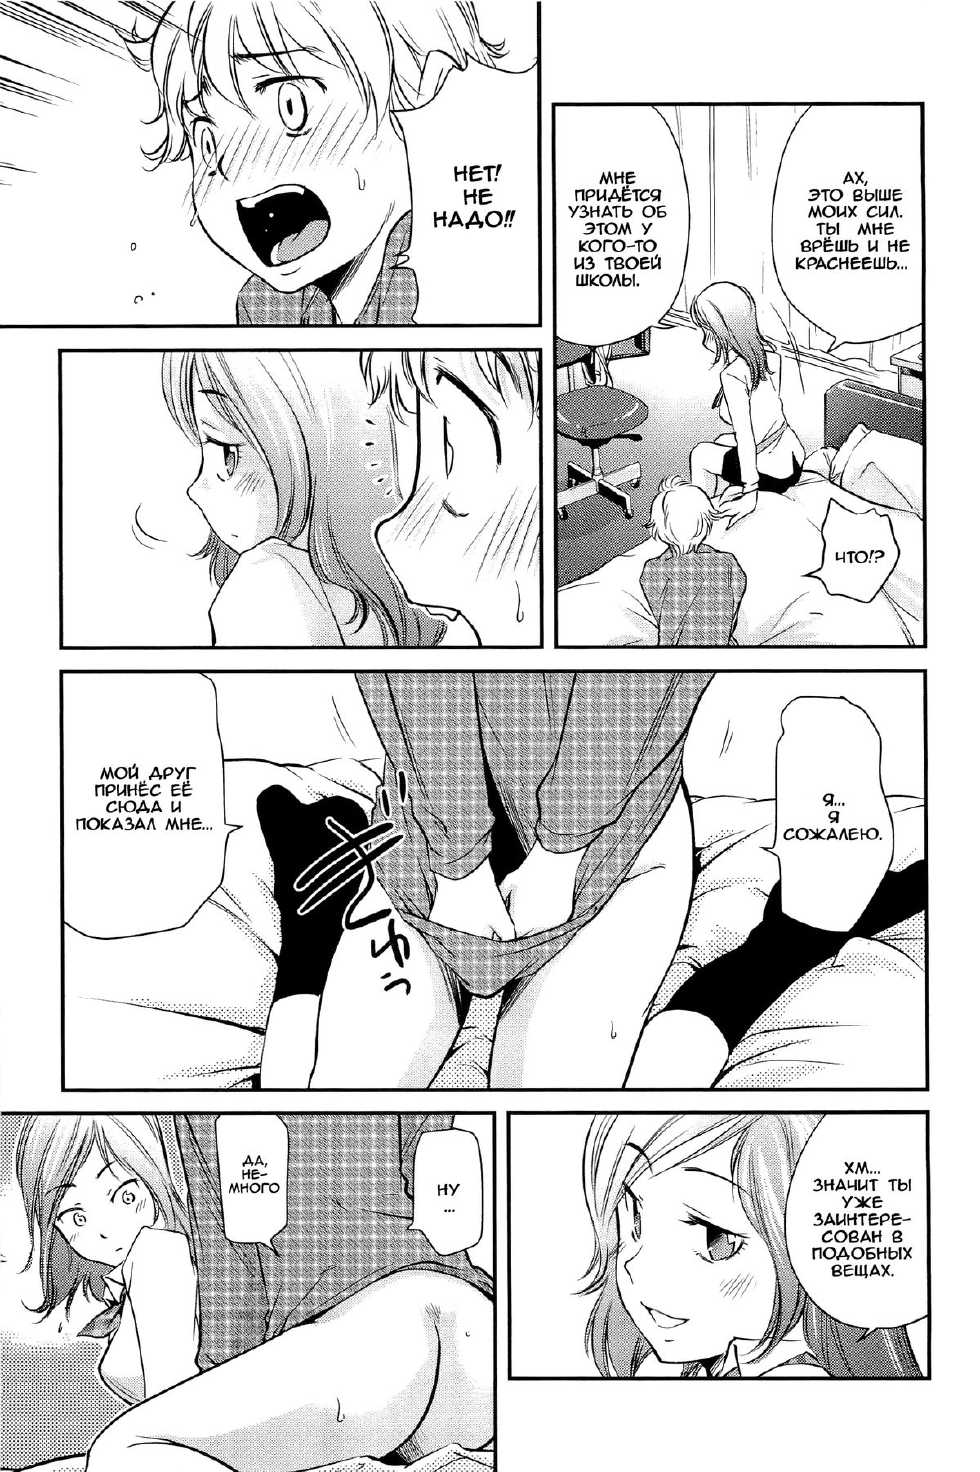 Pocket Pussy [Russian] [Rewrite] [Vemp] - Page 3